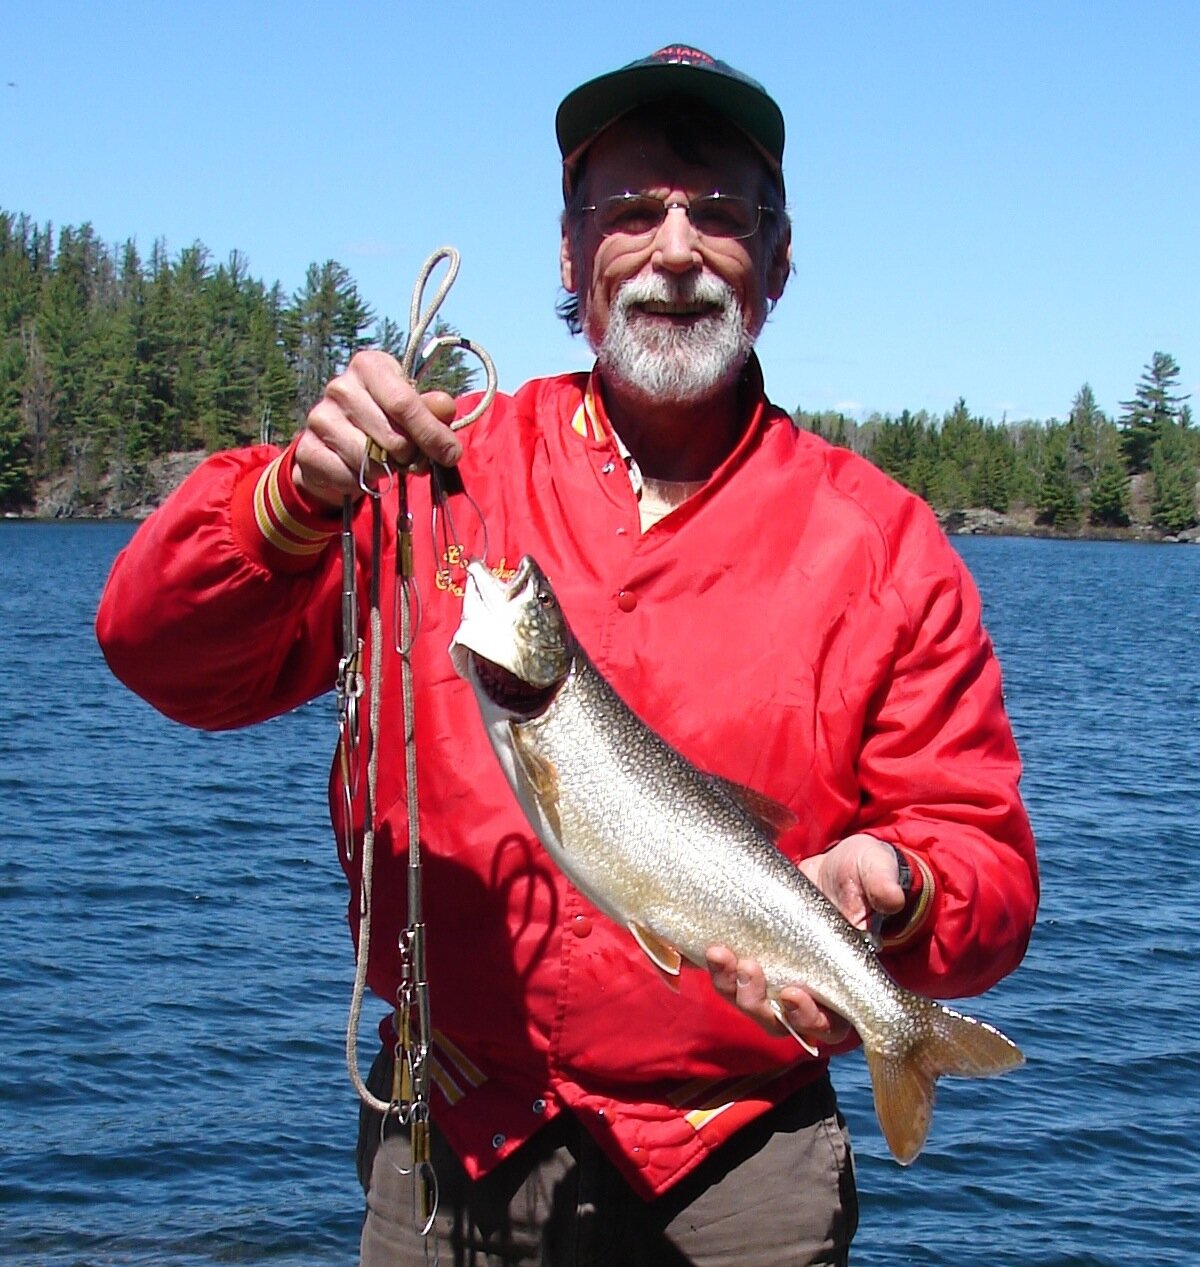 Retired biology teacher, fisherman and book collector.